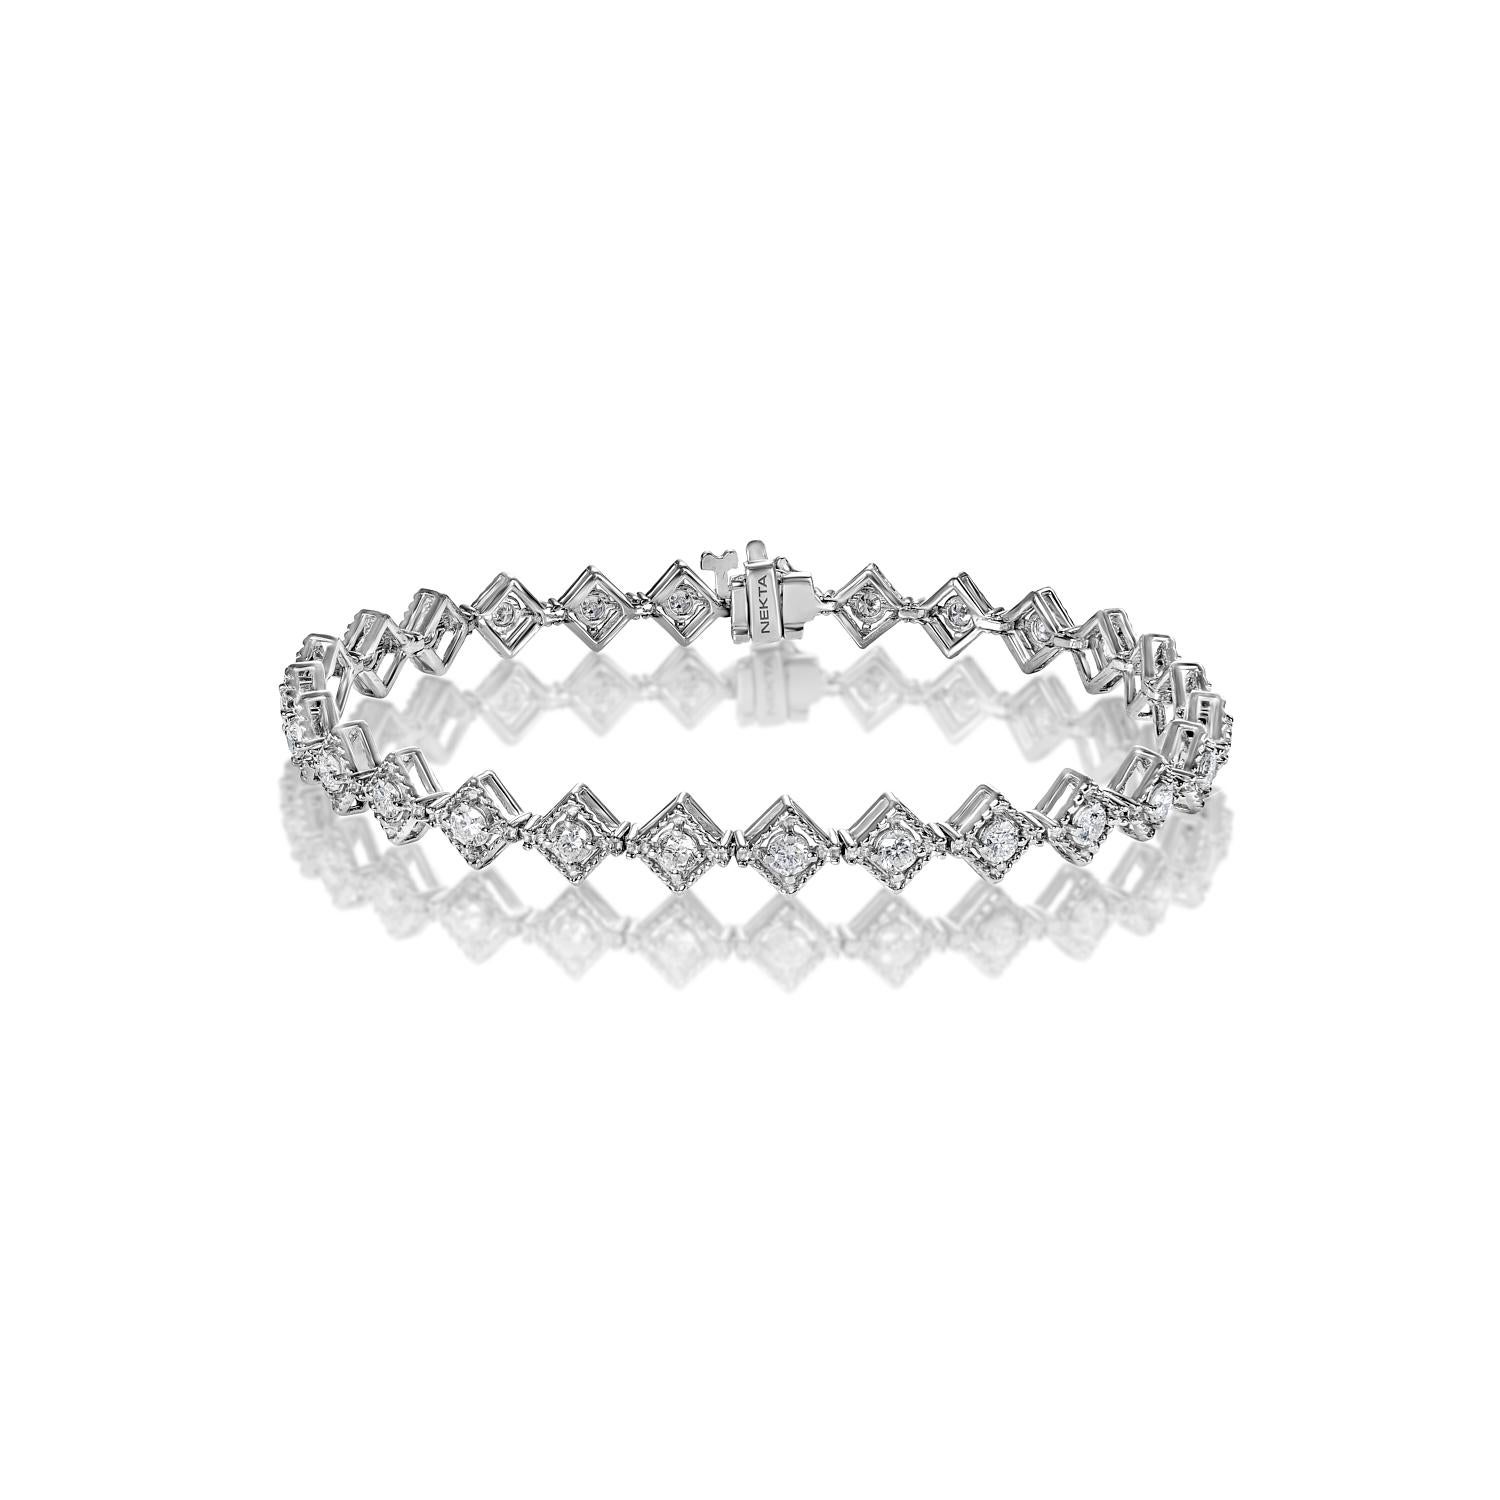 The ITZEL 1.93 Carat Single Row Diamond Bracelet features ROUND BRILLIANT CUT DIAMONDS weighing a total of approximately 1.93 carats, set in 14K White Gold.

Style: Single Row Diamond Bracelet


Diamonds
Diamond Size: 1.93 Carats
Diamond Shape: